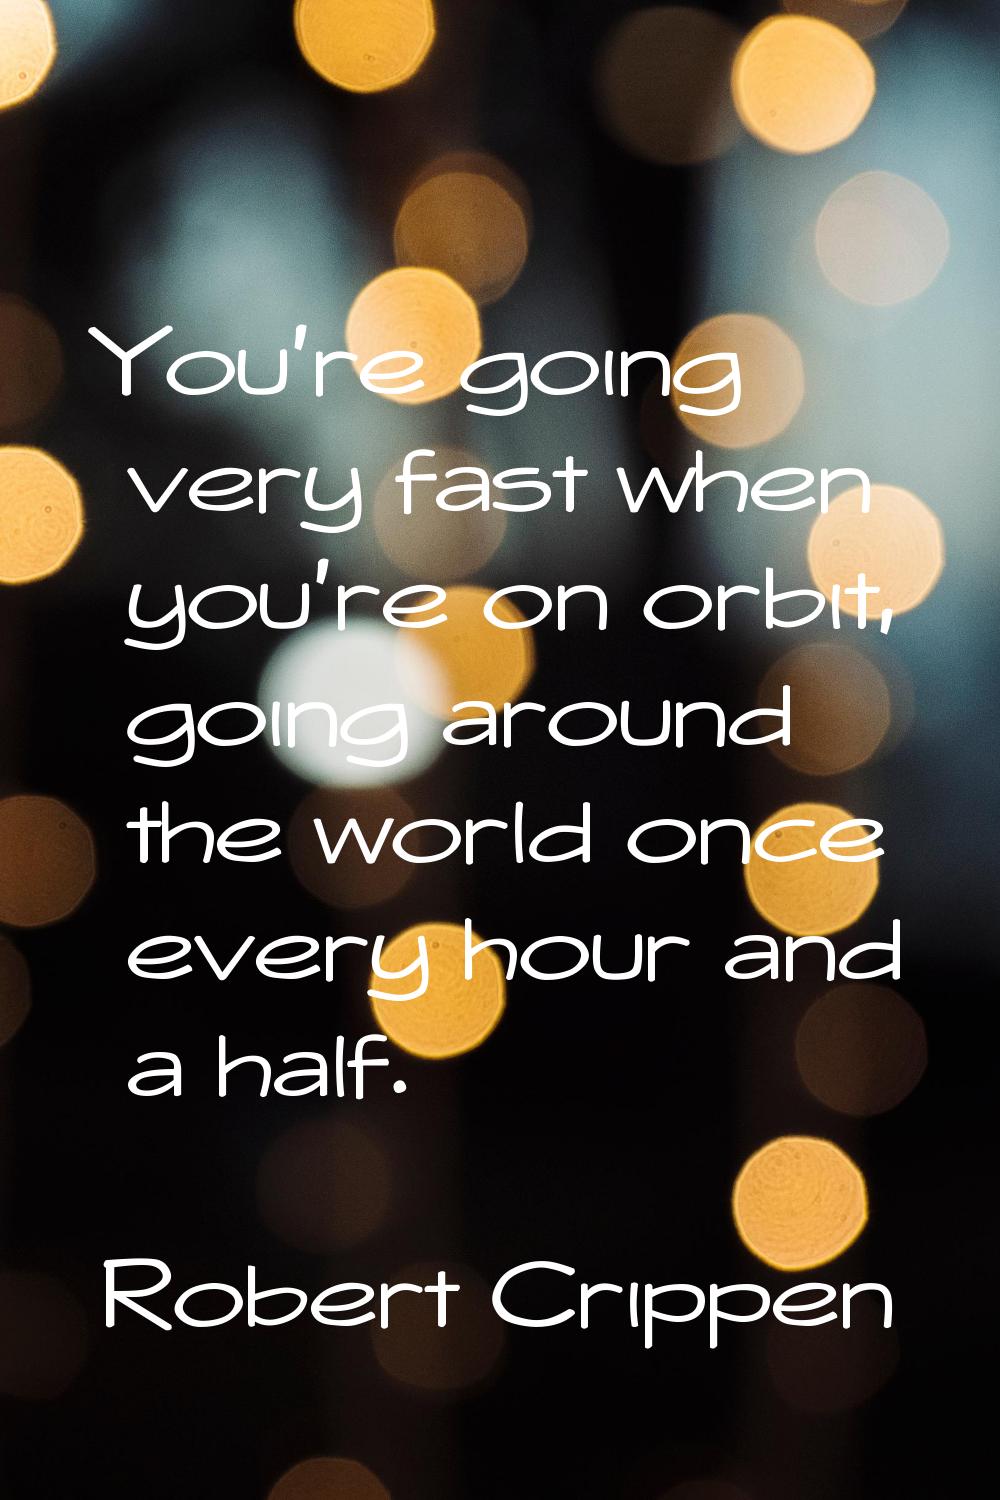 You're going very fast when you're on orbit, going around the world once every hour and a half.